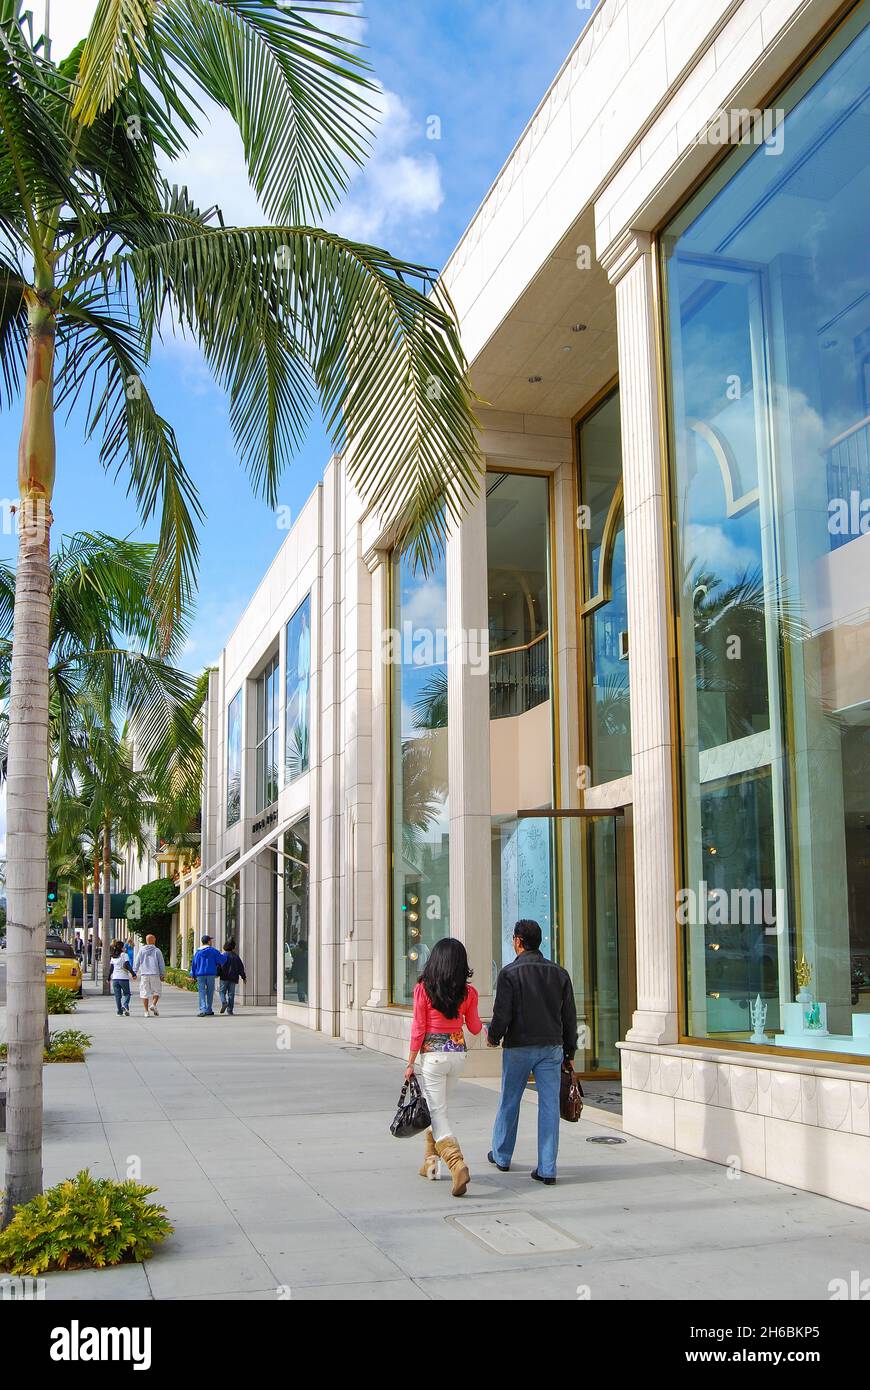 Street scene, N.Rodeo Drive, Beverly Hills, Los Angeles, California, United States of America Stock Photo